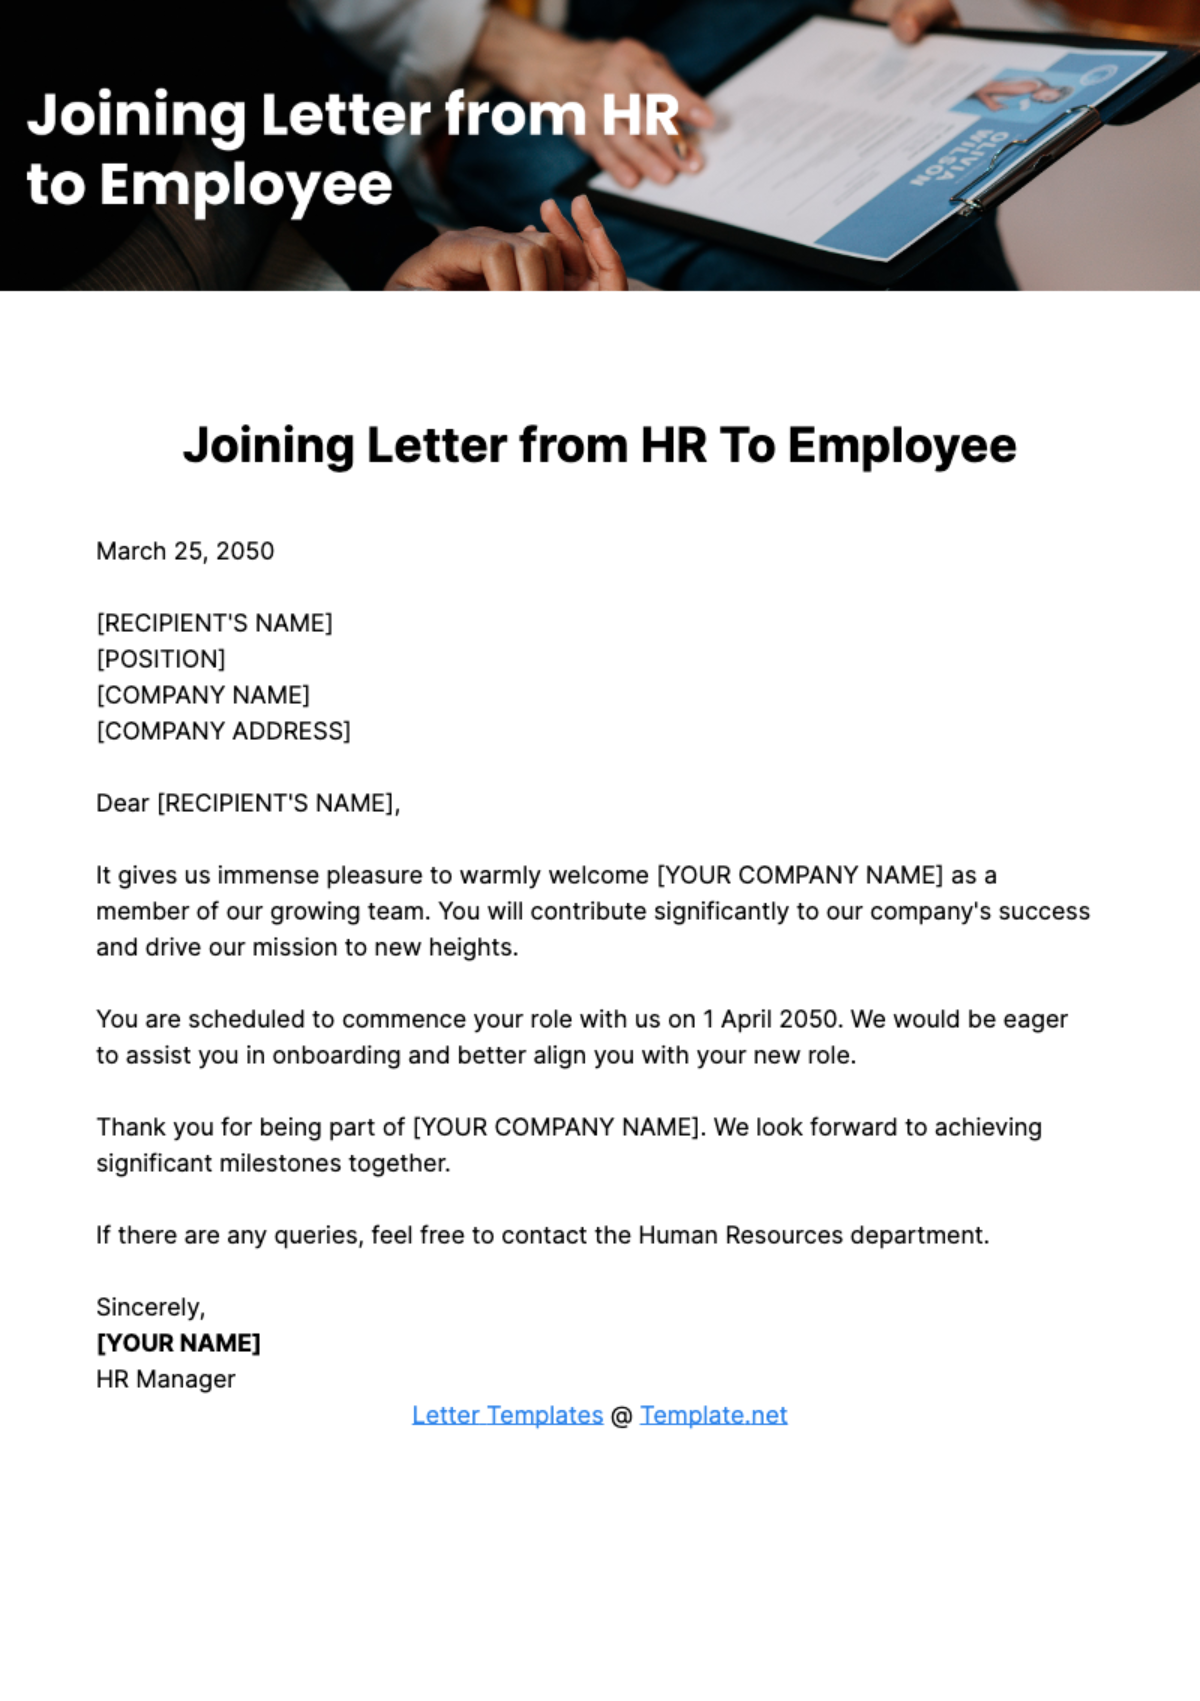 Free Joining Letter from HR to Employee Template